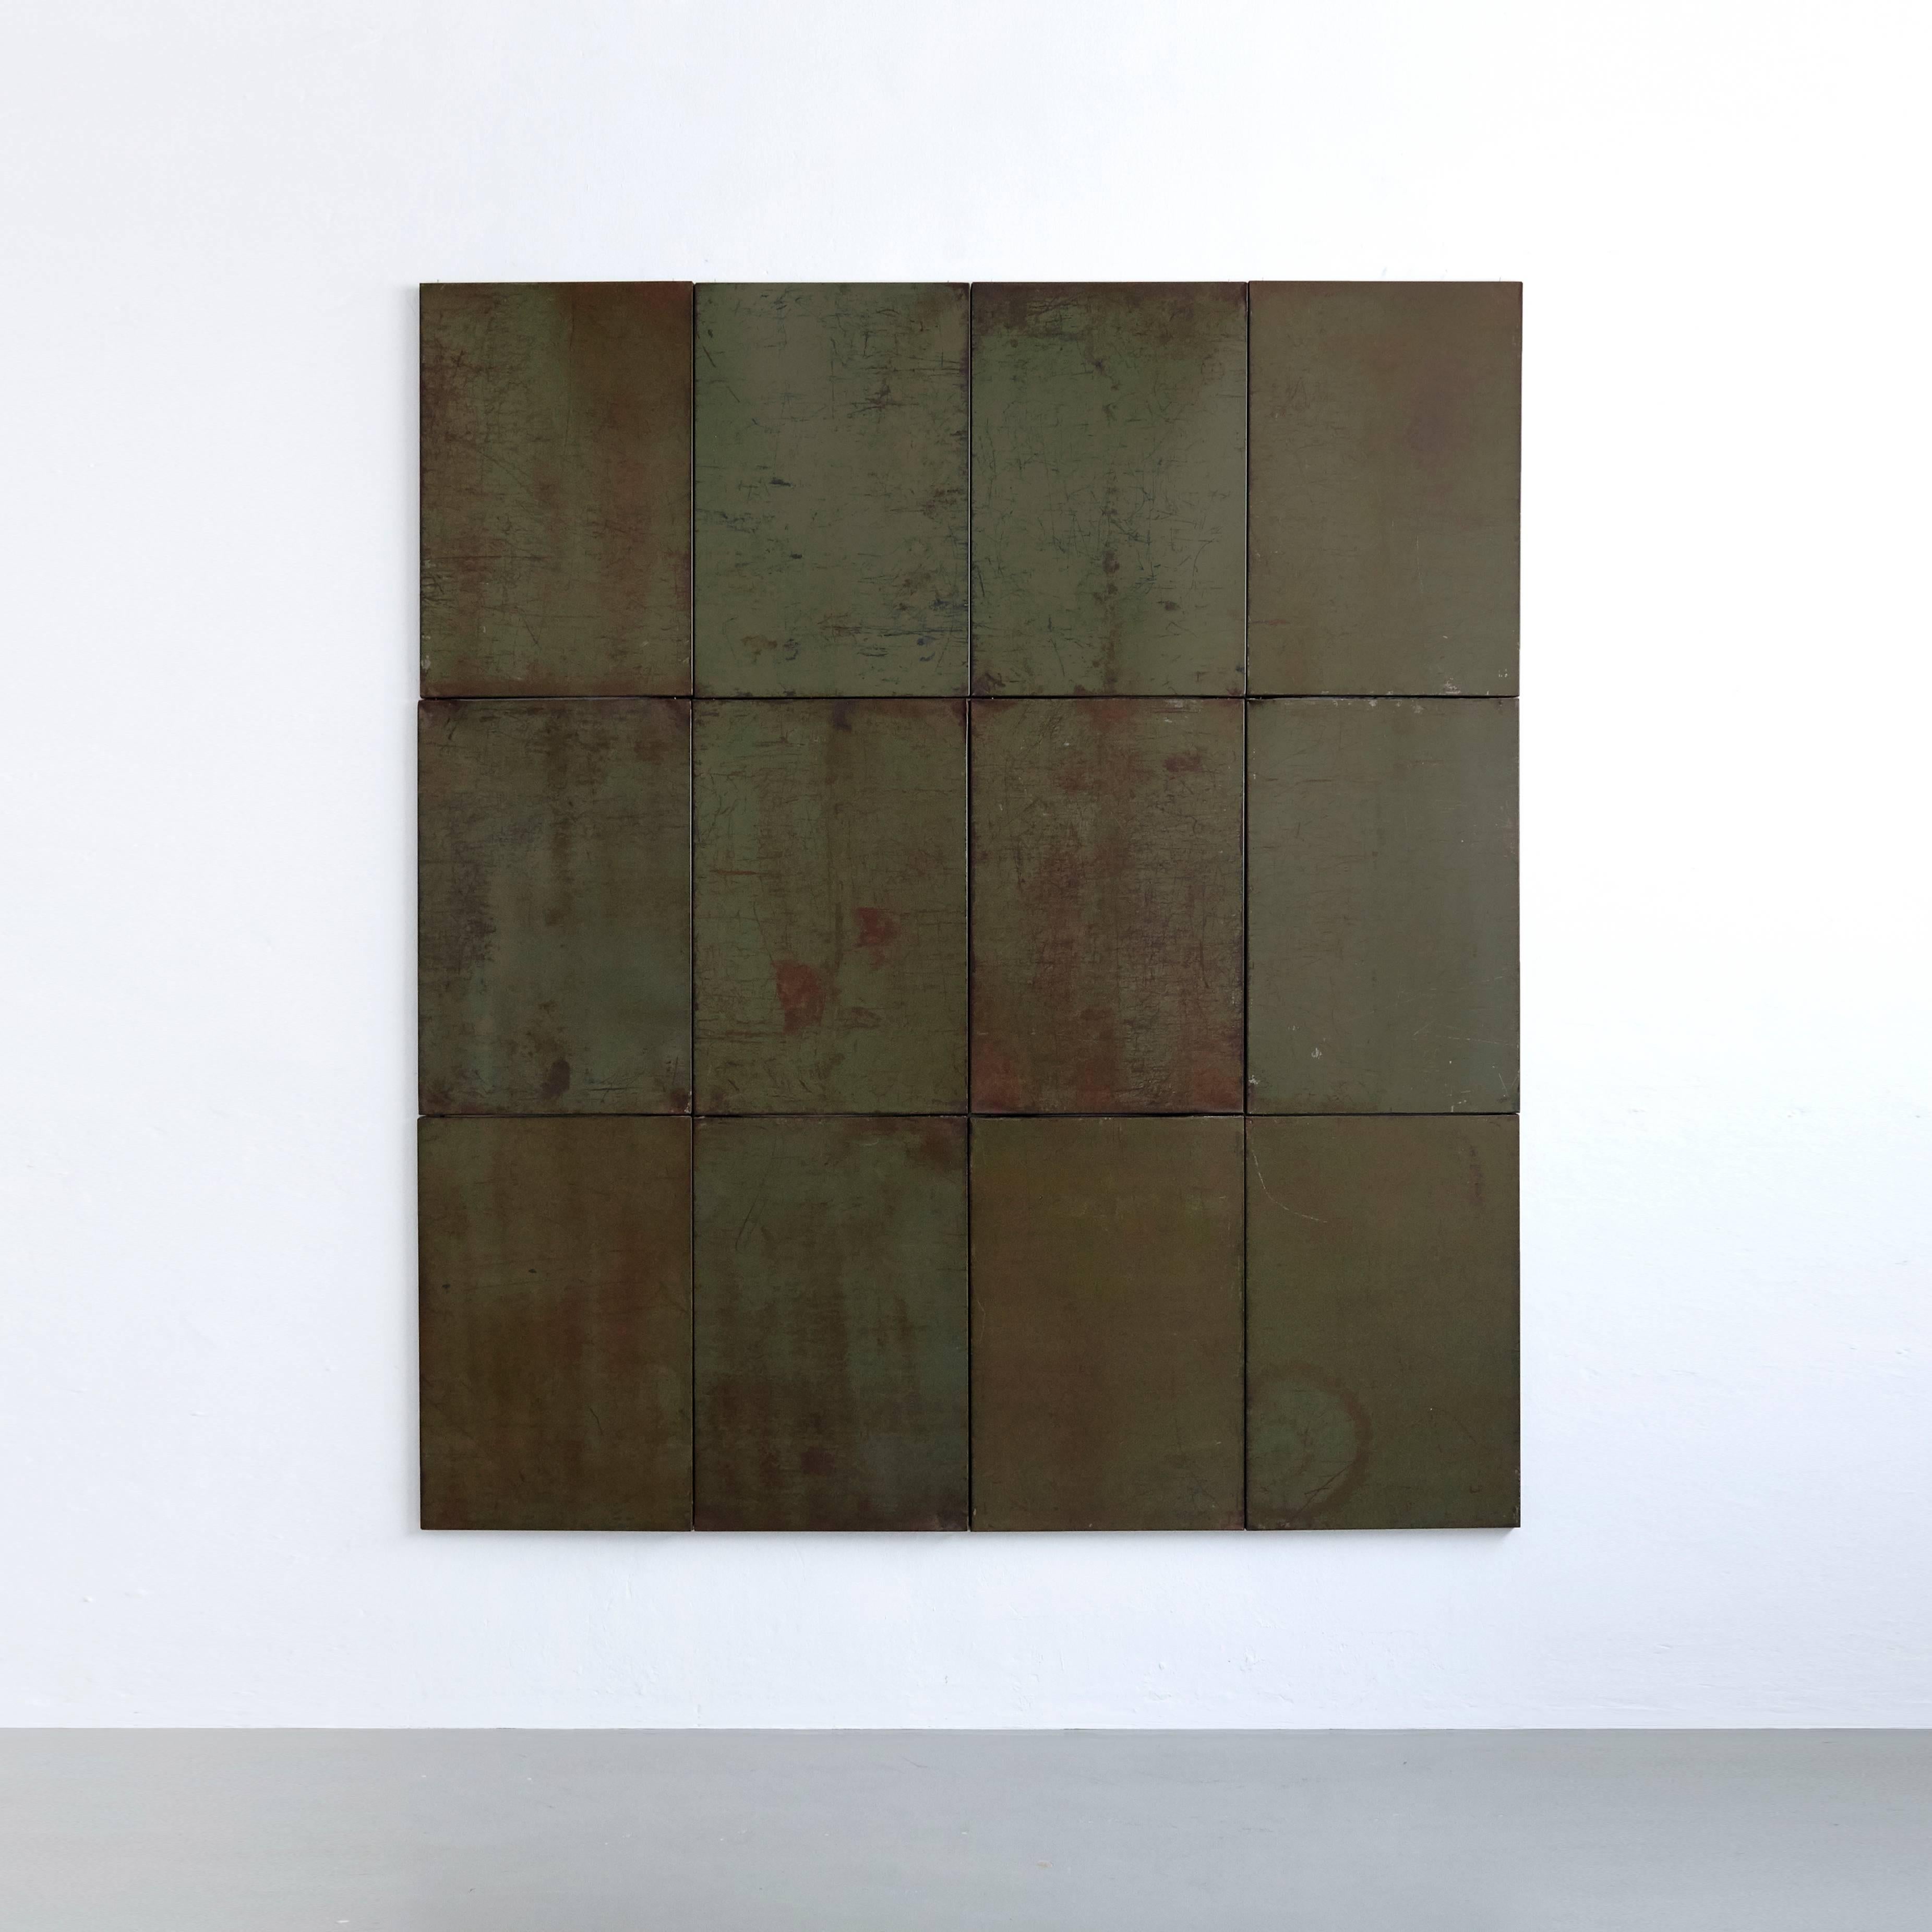 Ramon Horts, Minimalism large metal artwork.

Structures of metal compositions made in Barcelona in 2017 for a solo Exhibition.
Signed by himself in engraving punch.

Scraped metal, rusted and varnished.

In original condition.



 